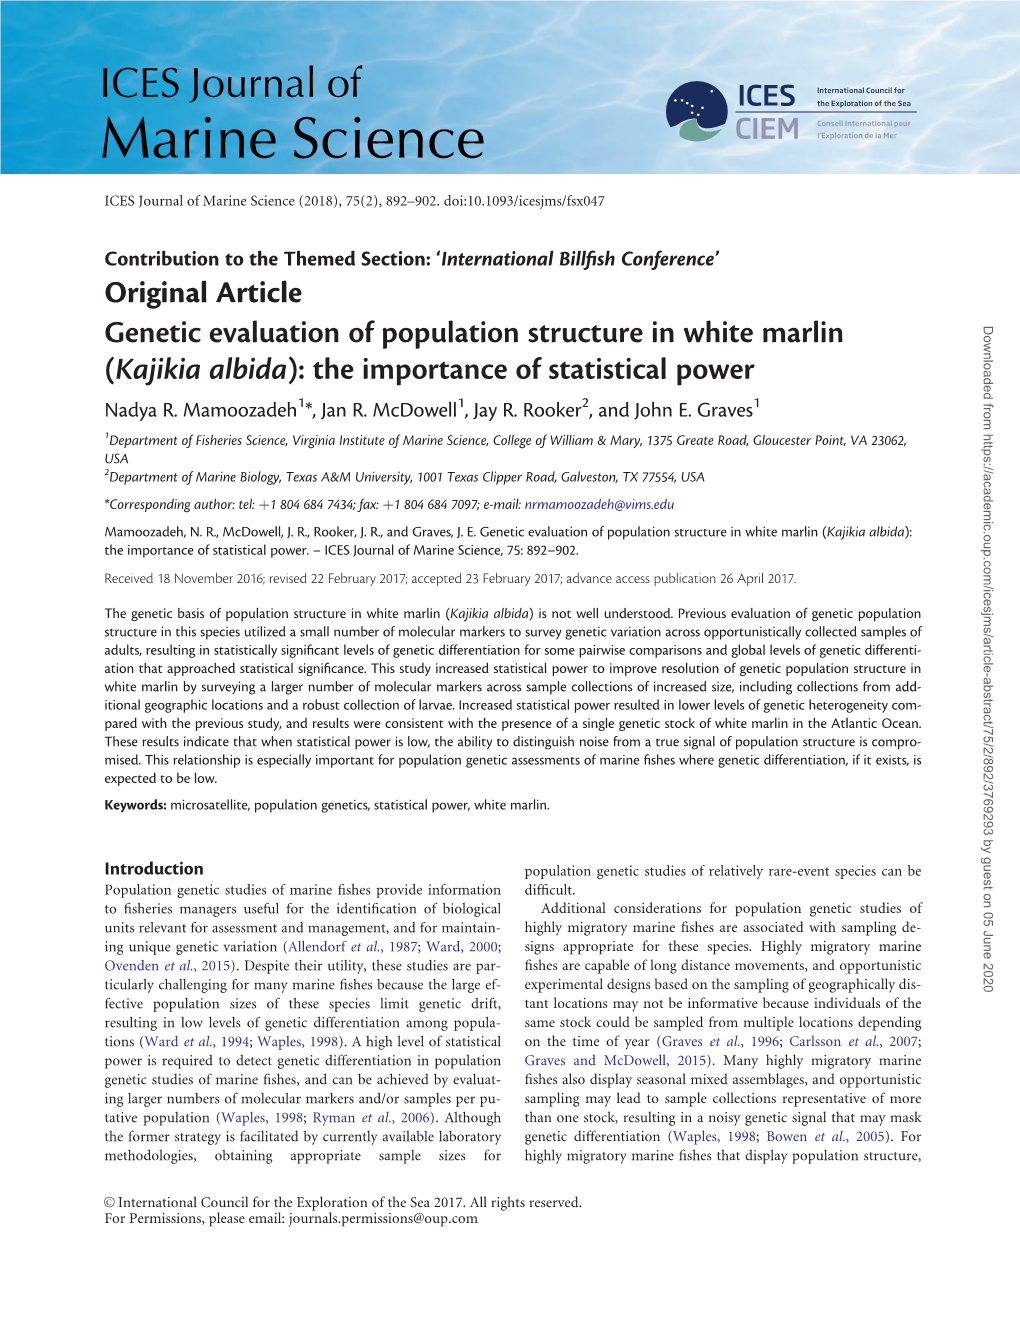 Genetic Evaluation of Population Structure in White Marlin